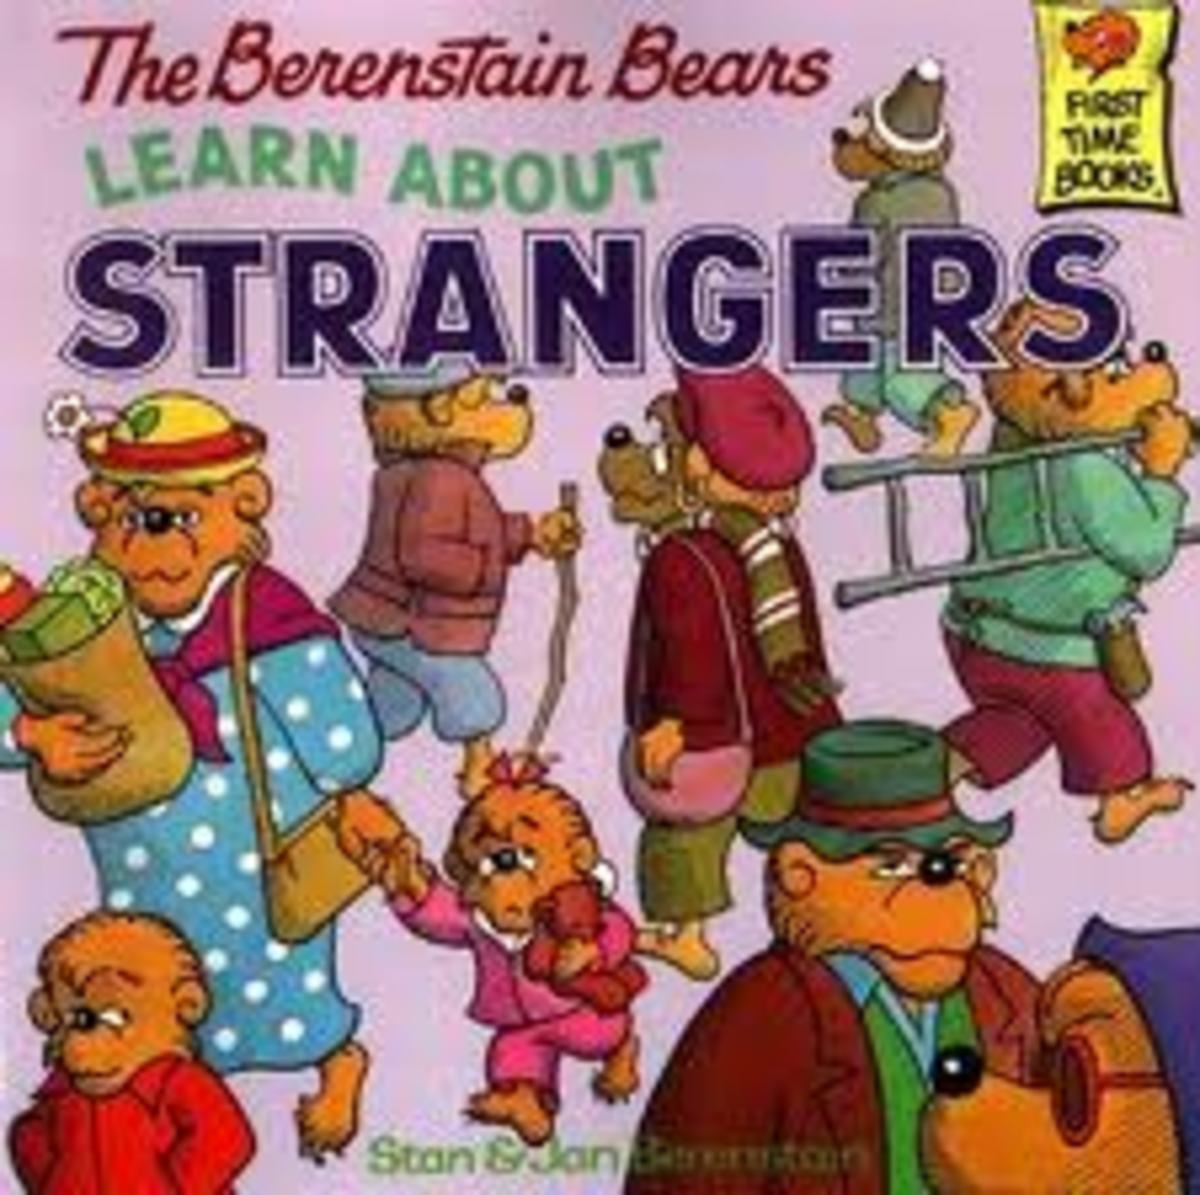 Books for Dealing with Strangers: The Berenstain Bears Learn About Strangers